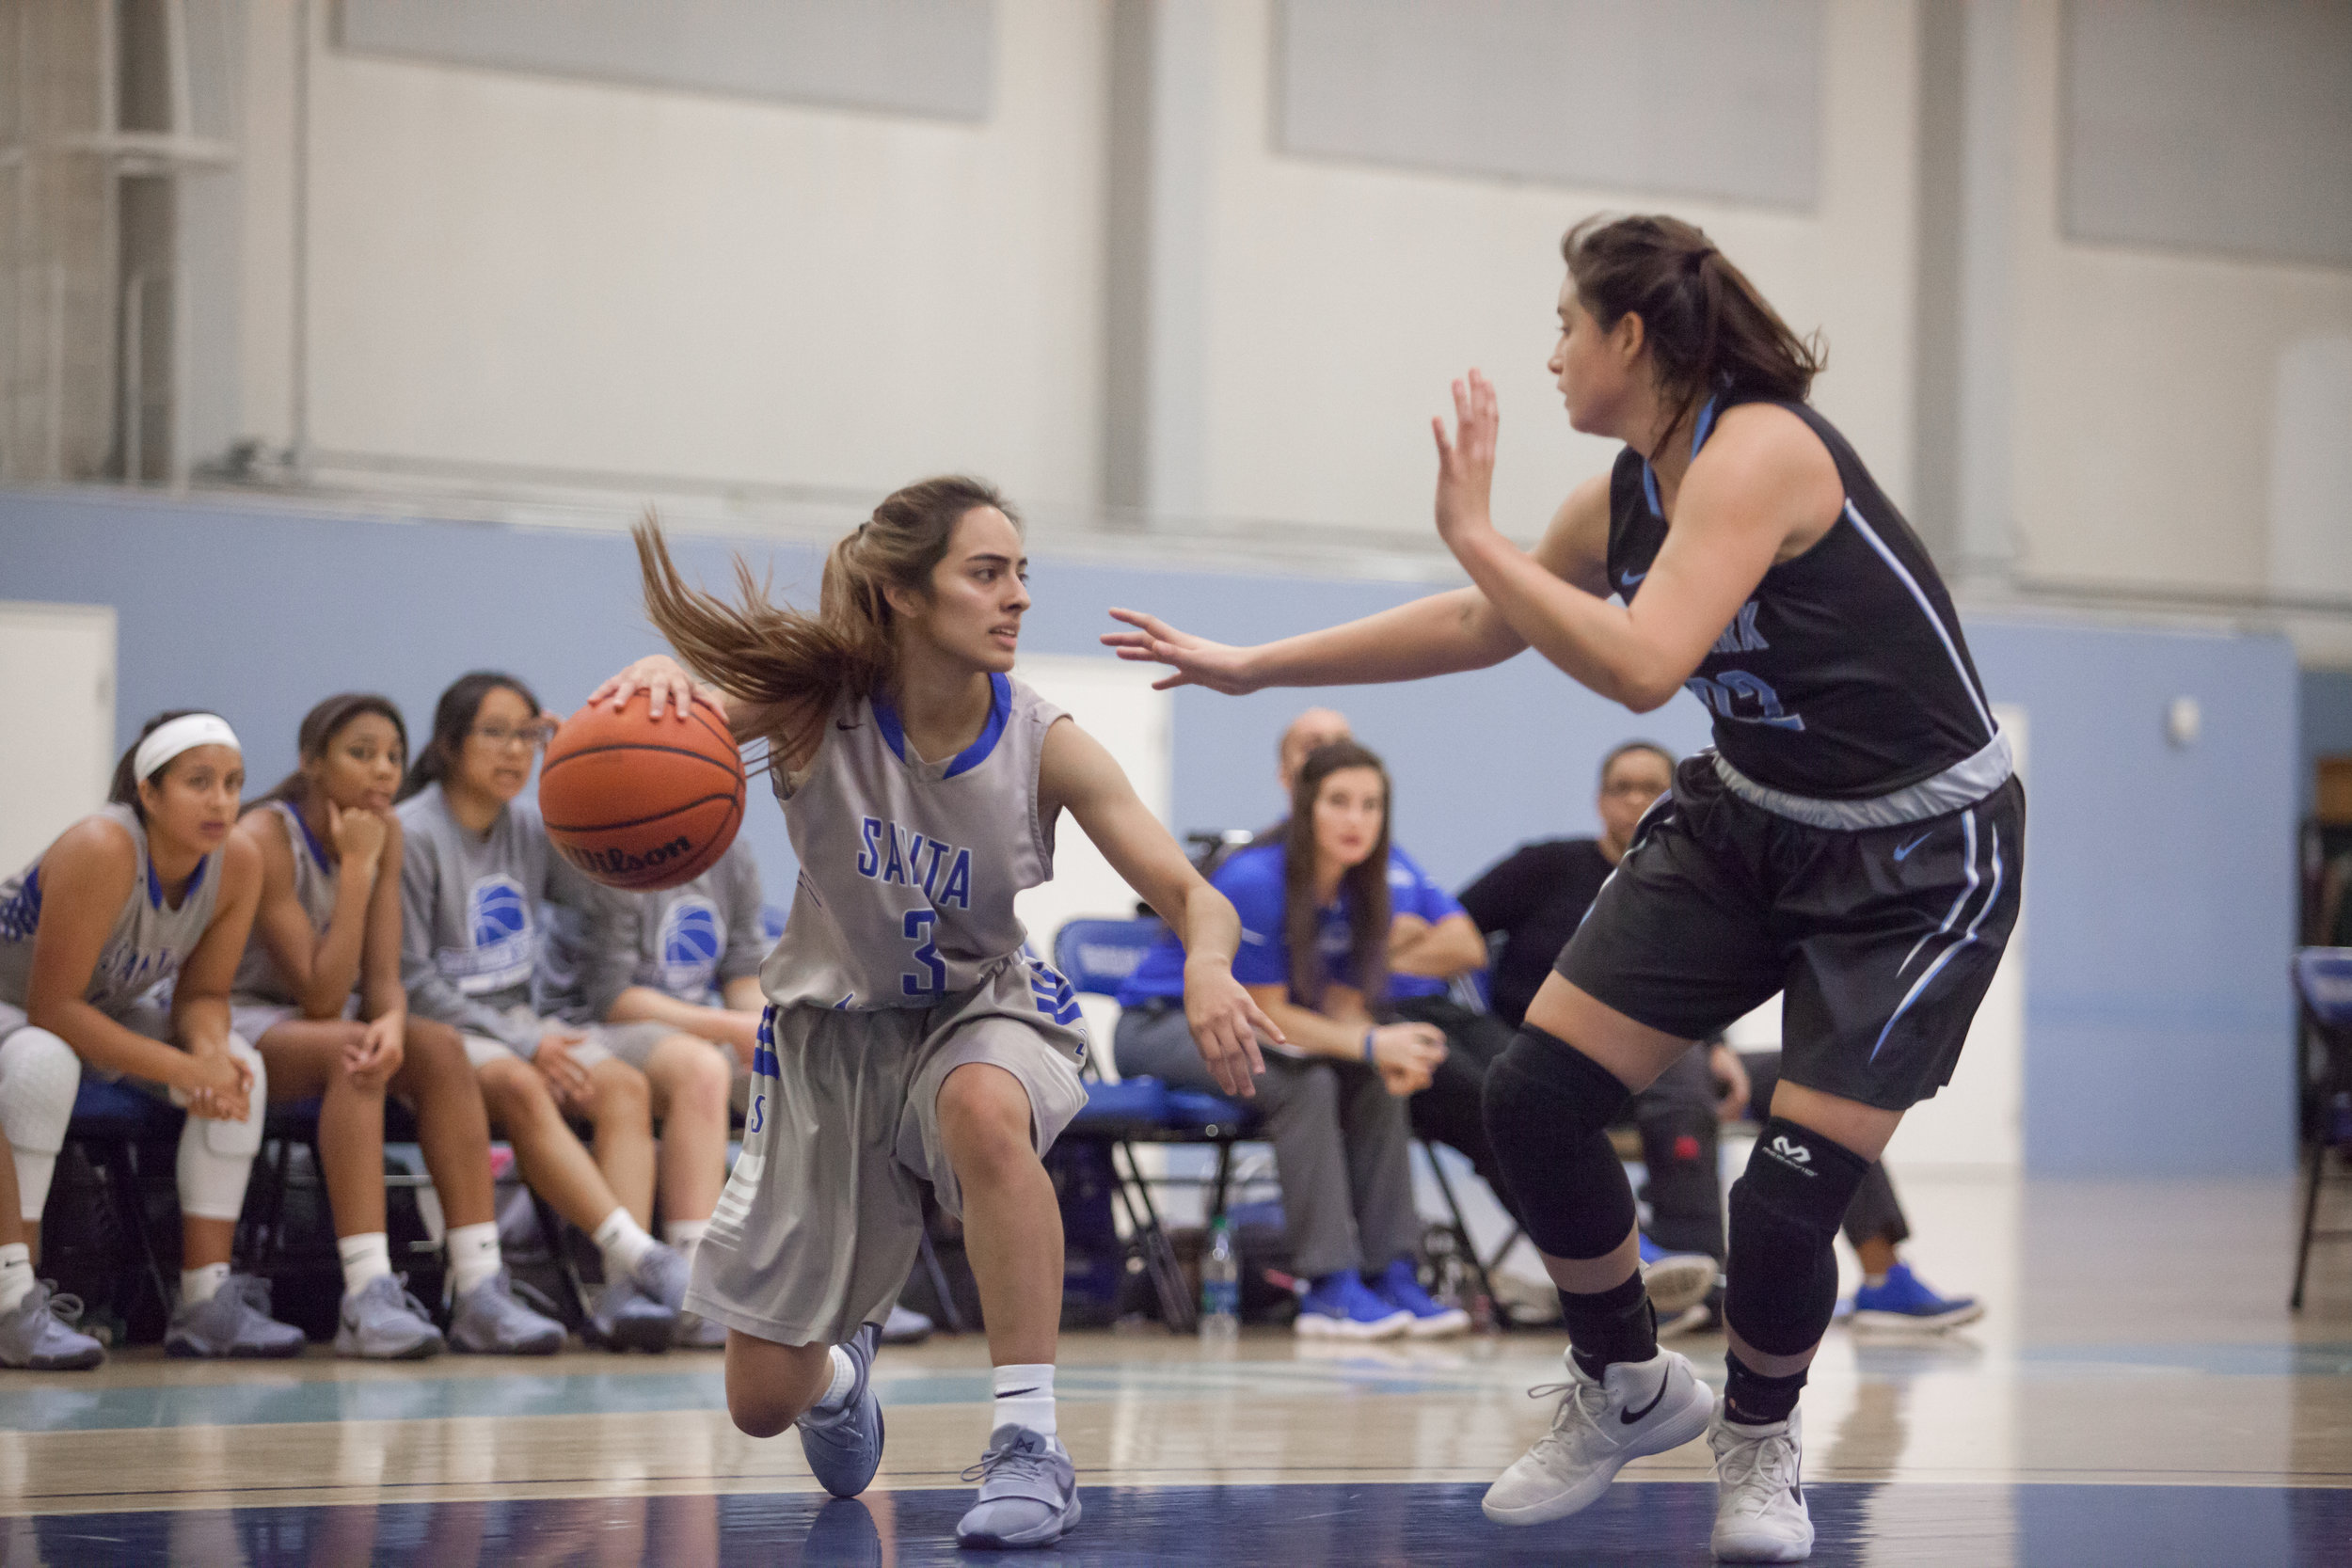  Luna Rivera (3) of the Santa Monica College try to bypass a guard Sydney Arikawa (22) of the Moonpark College. The Santa Monica College Corsairs loss the home game 52-69 against the Moonpark College.   The game held on Saturday, December 9th, 2017 a